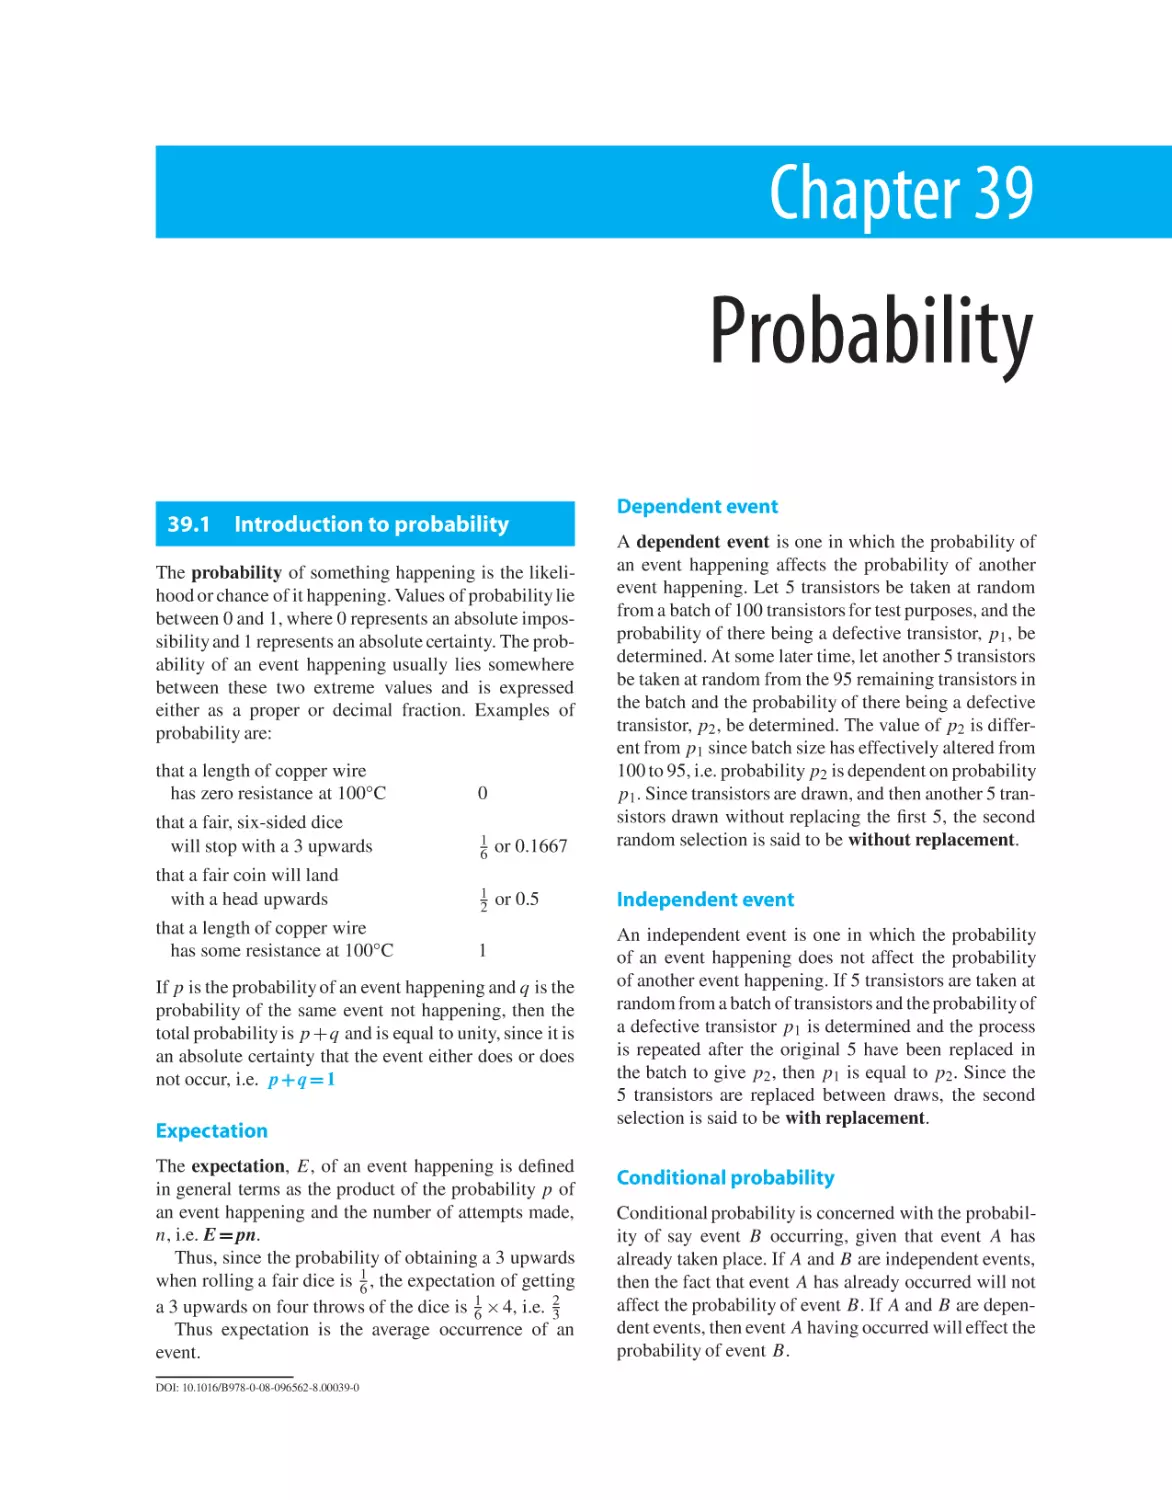 Chapter 39. Probability
39.1 Introduction to probability